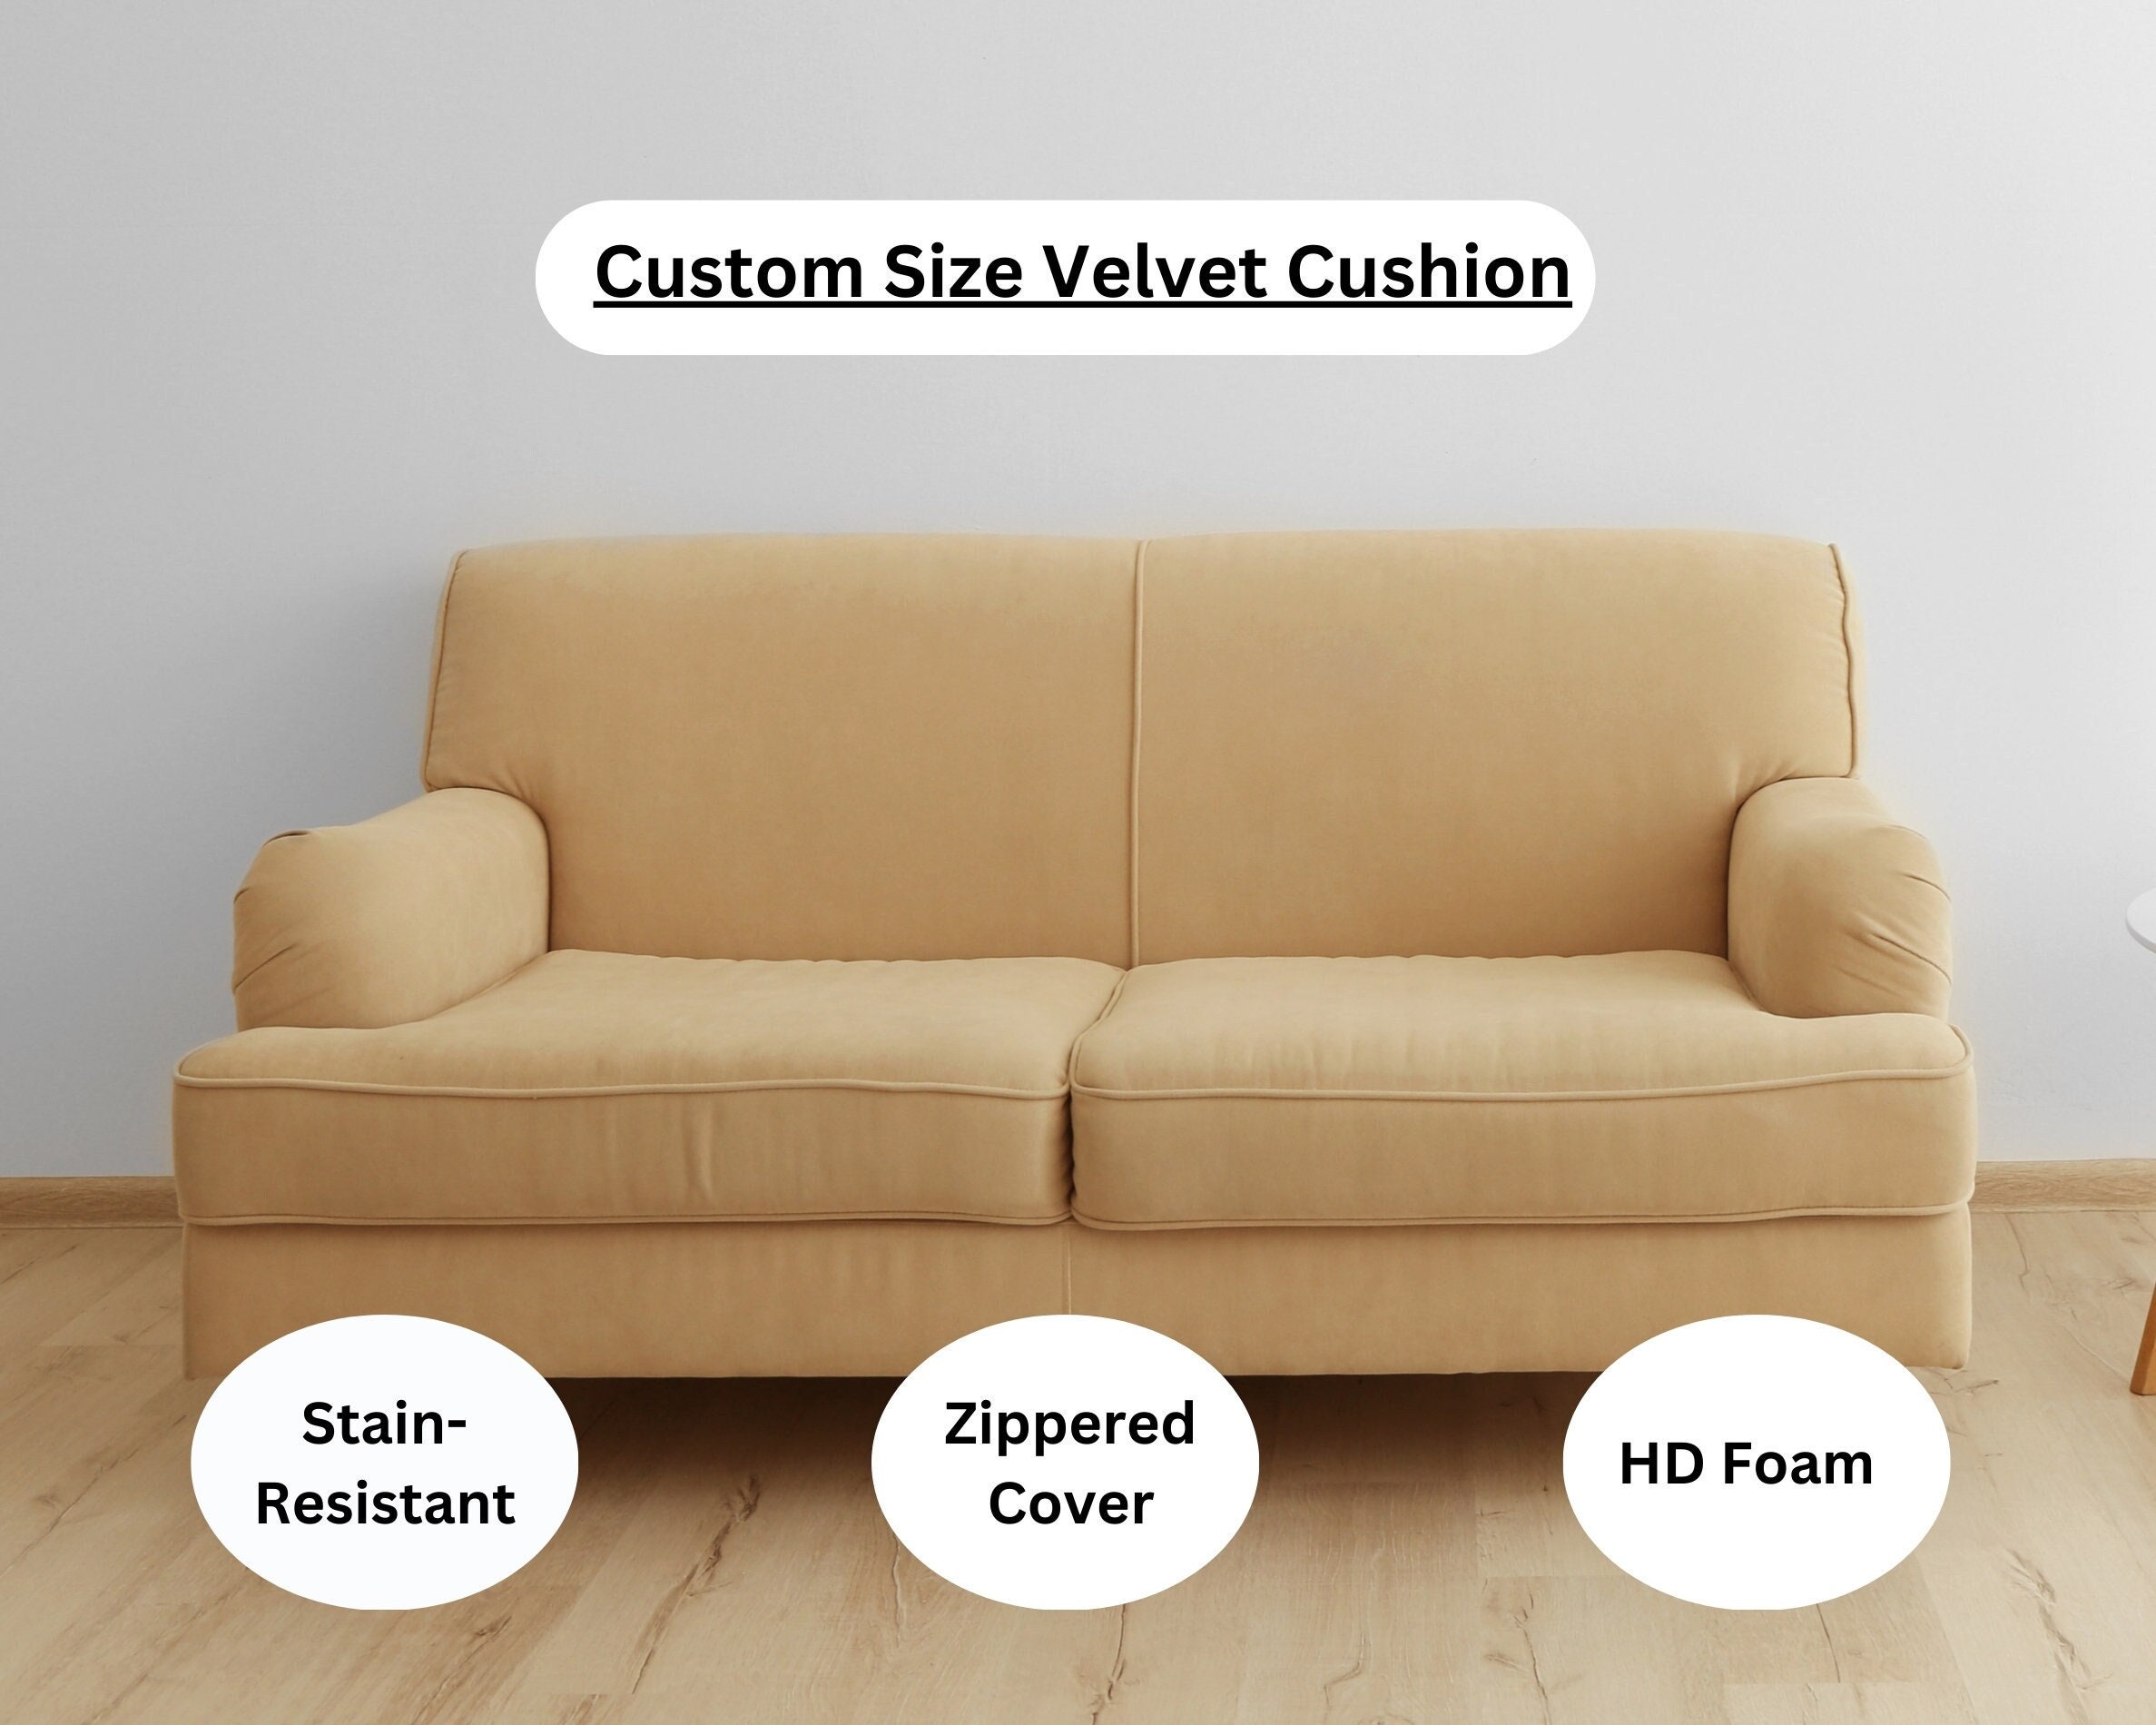 5 X 24 X 24 Upholstery Foam High Density 44-ILD Foam chair Cushion Square  Foam for Dinning Chairs, Wheelchair Seat Cushion Replacement 